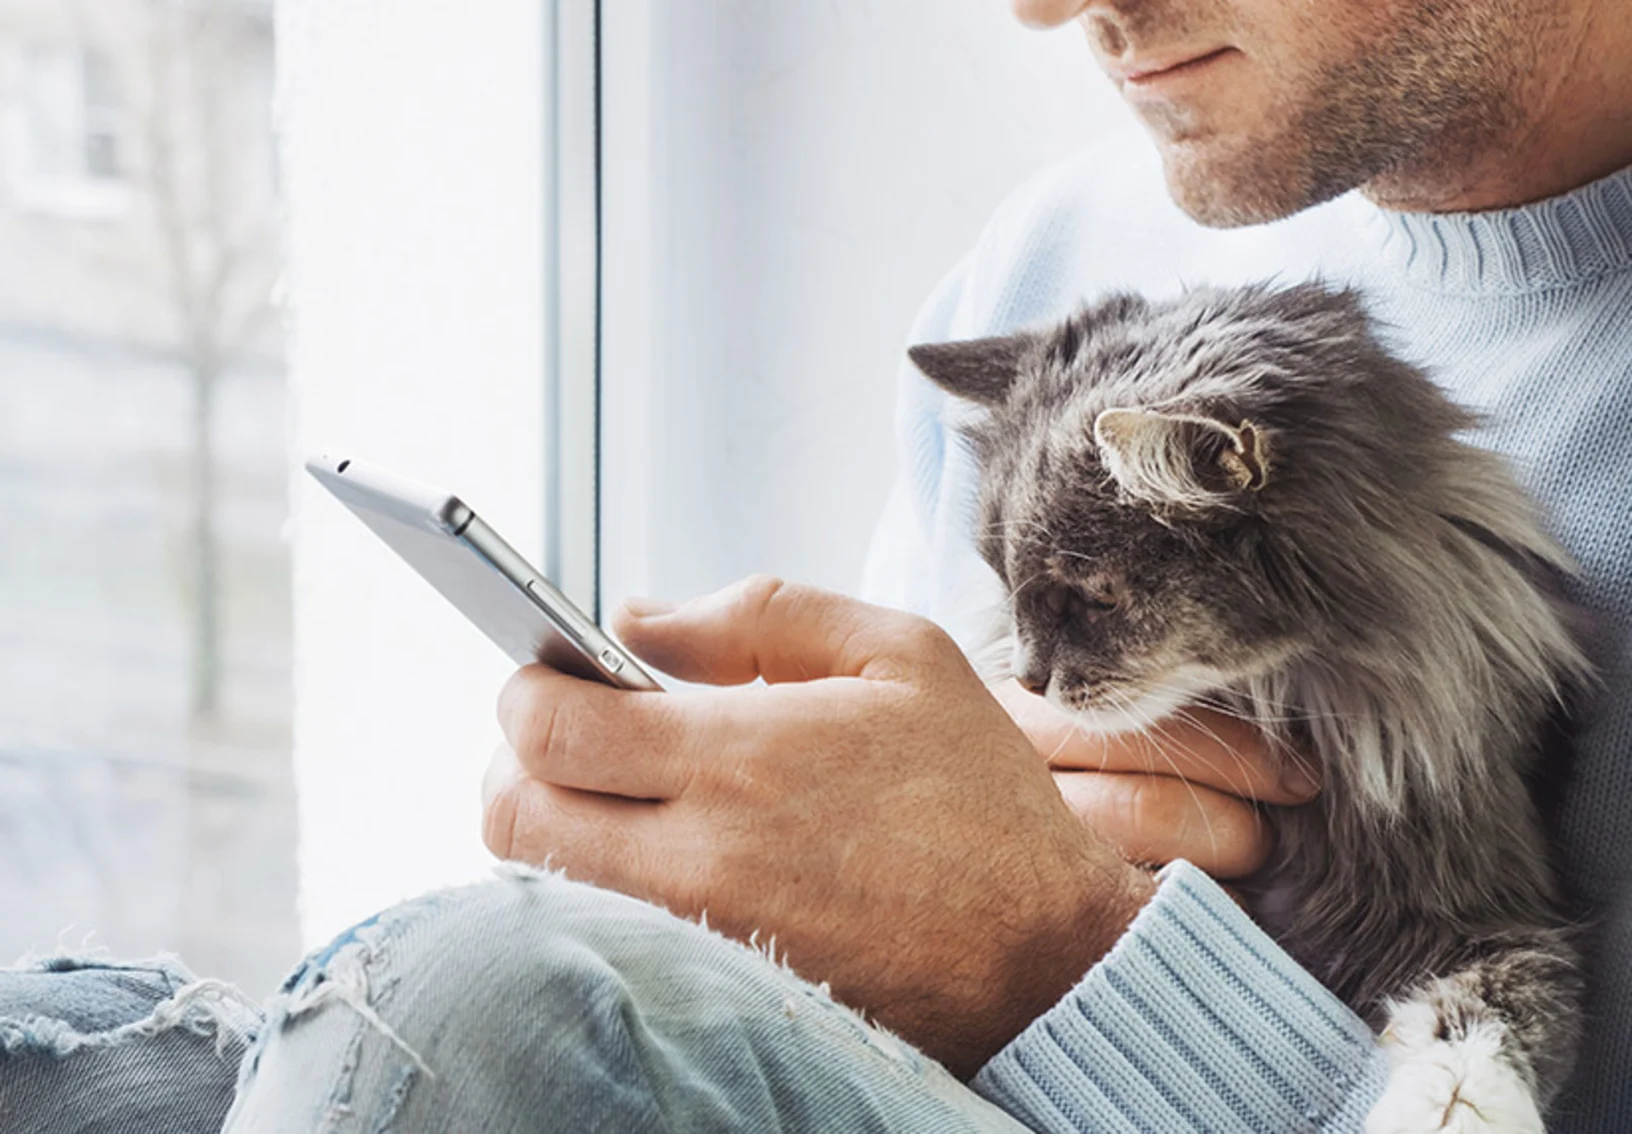 Man using his cell phone sitting next to a window holding a cat in his lap